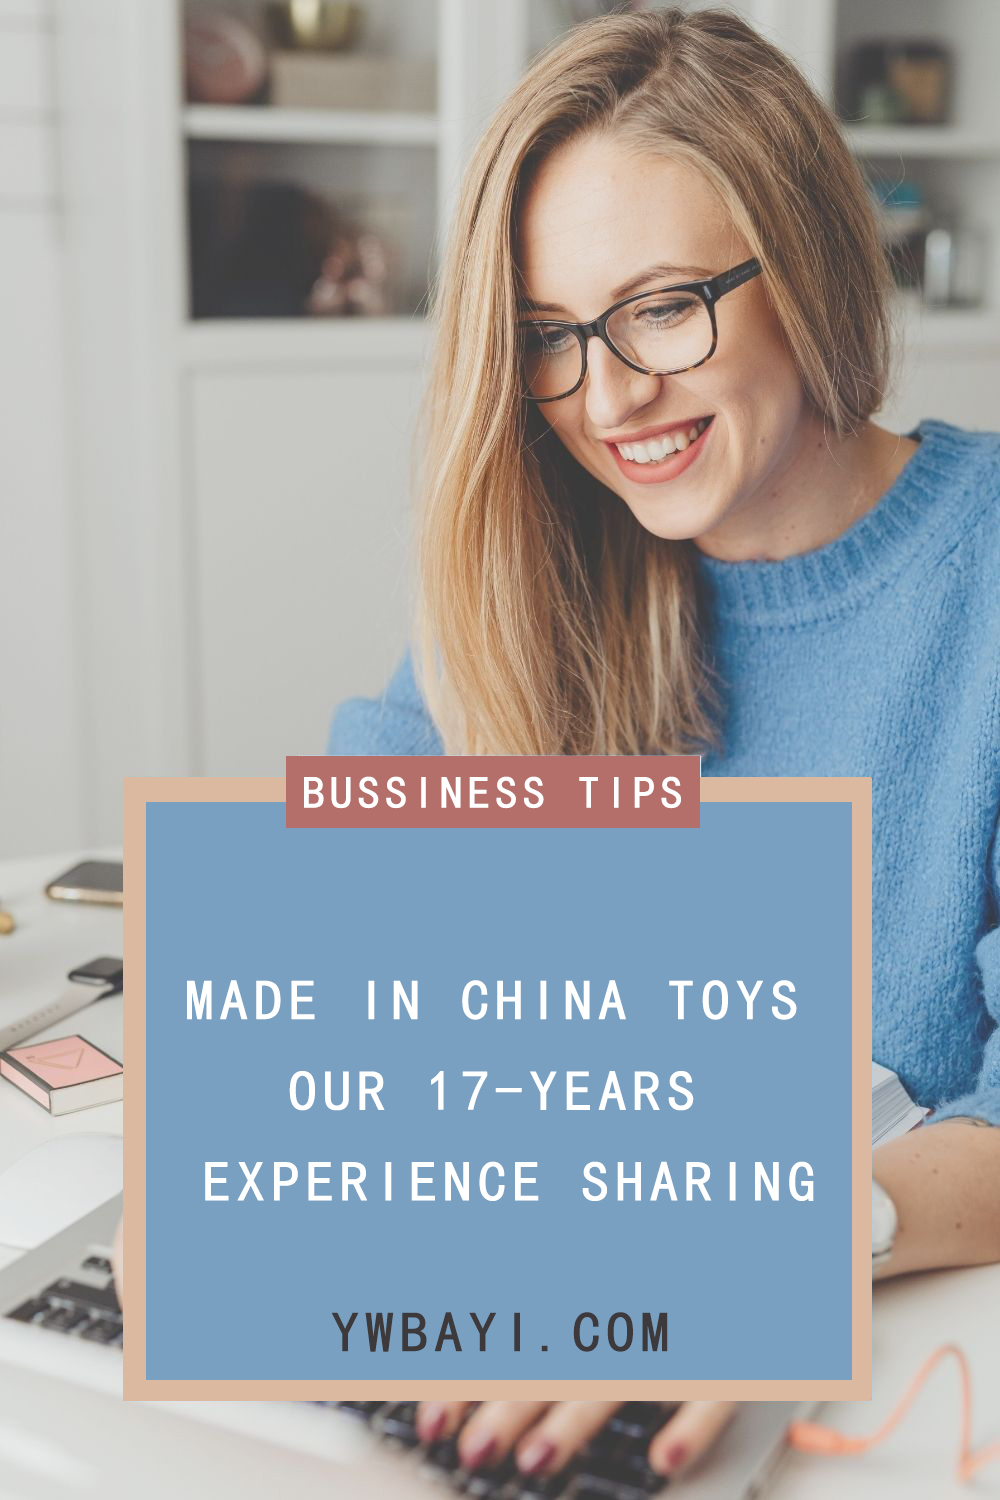 Made In China Toys our 10-years experience sharing